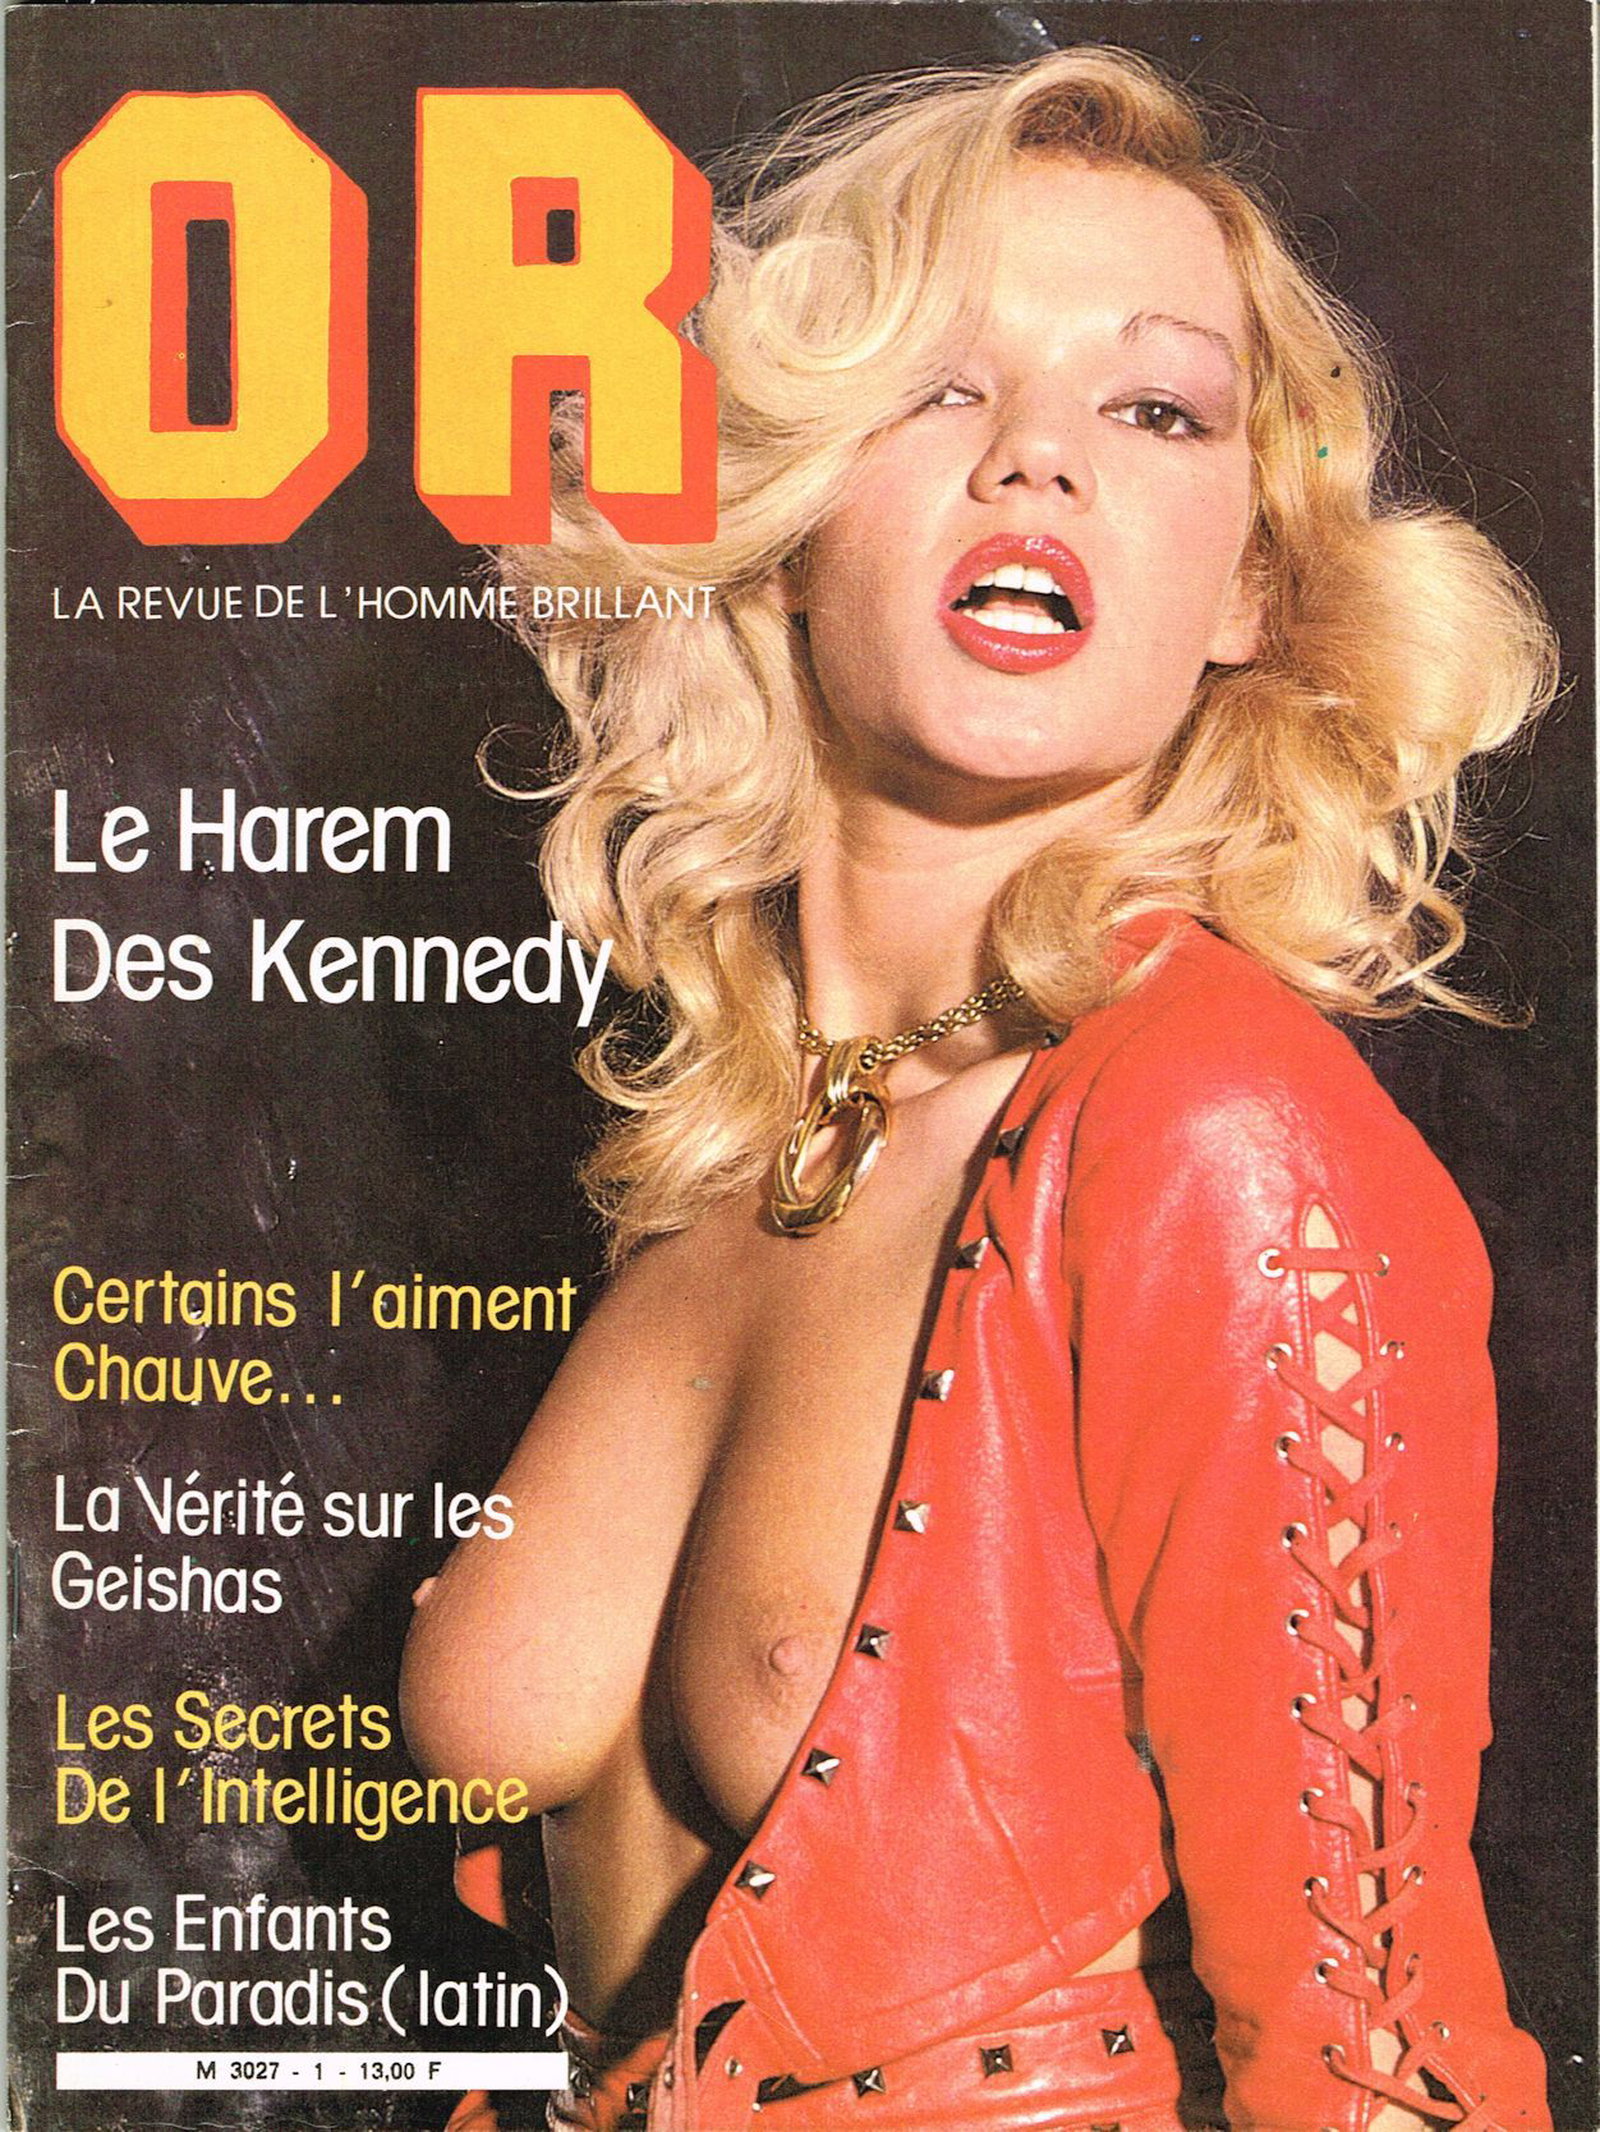 Photo by Corstophine with the username @Corstophine,  December 18, 2018 at 9:38 AM. The post is about the topic '70s Glamour and the text says 'Brigitte Lahaie'